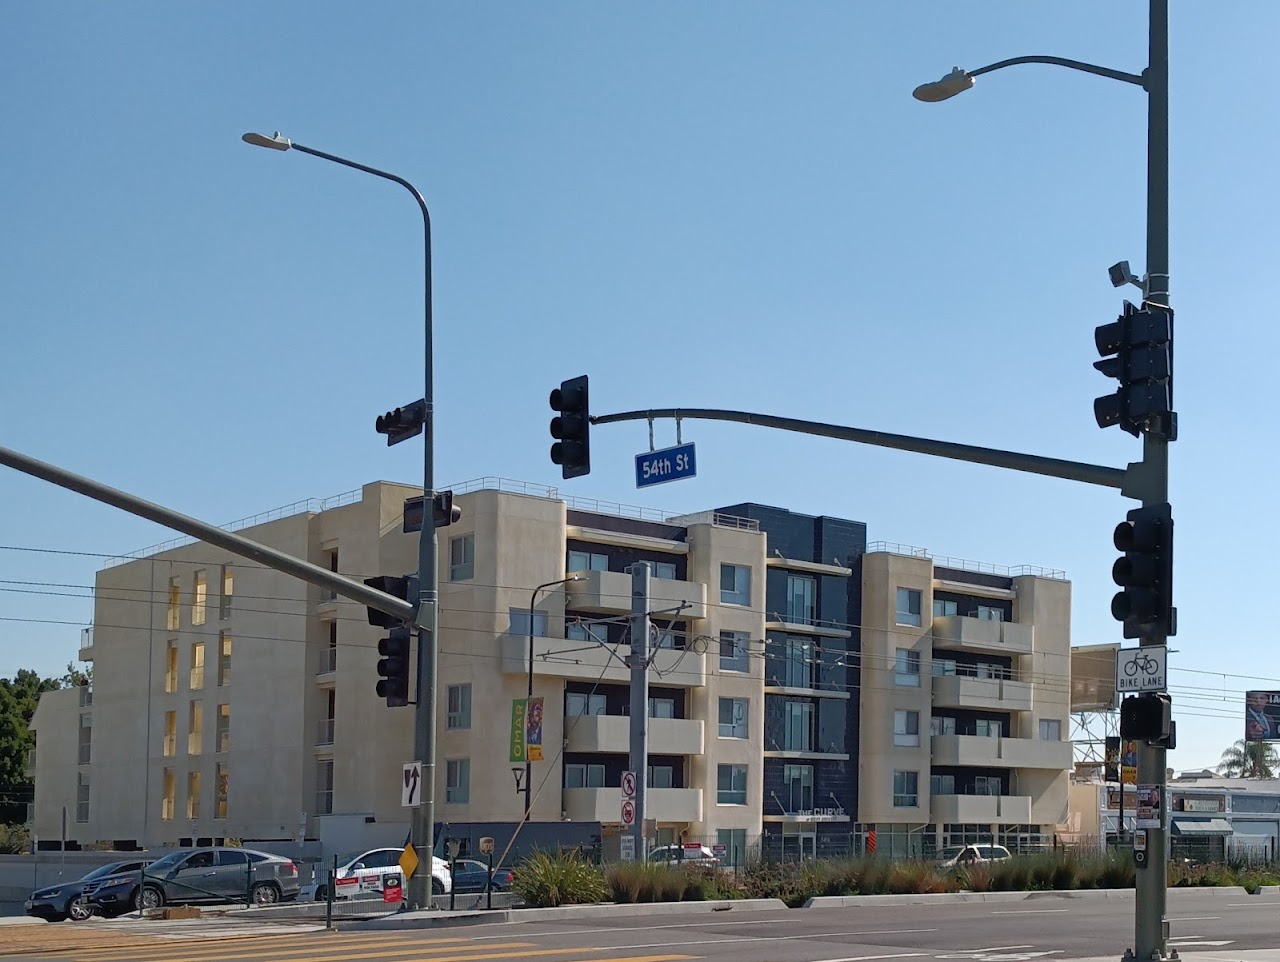 Photo of WEST ANGELES CITY PLACE SENIOR APARTMENTS. Affordable housing located at 5414 CRENSHAW BOULEVARD LOS ANGELES, CA 90043